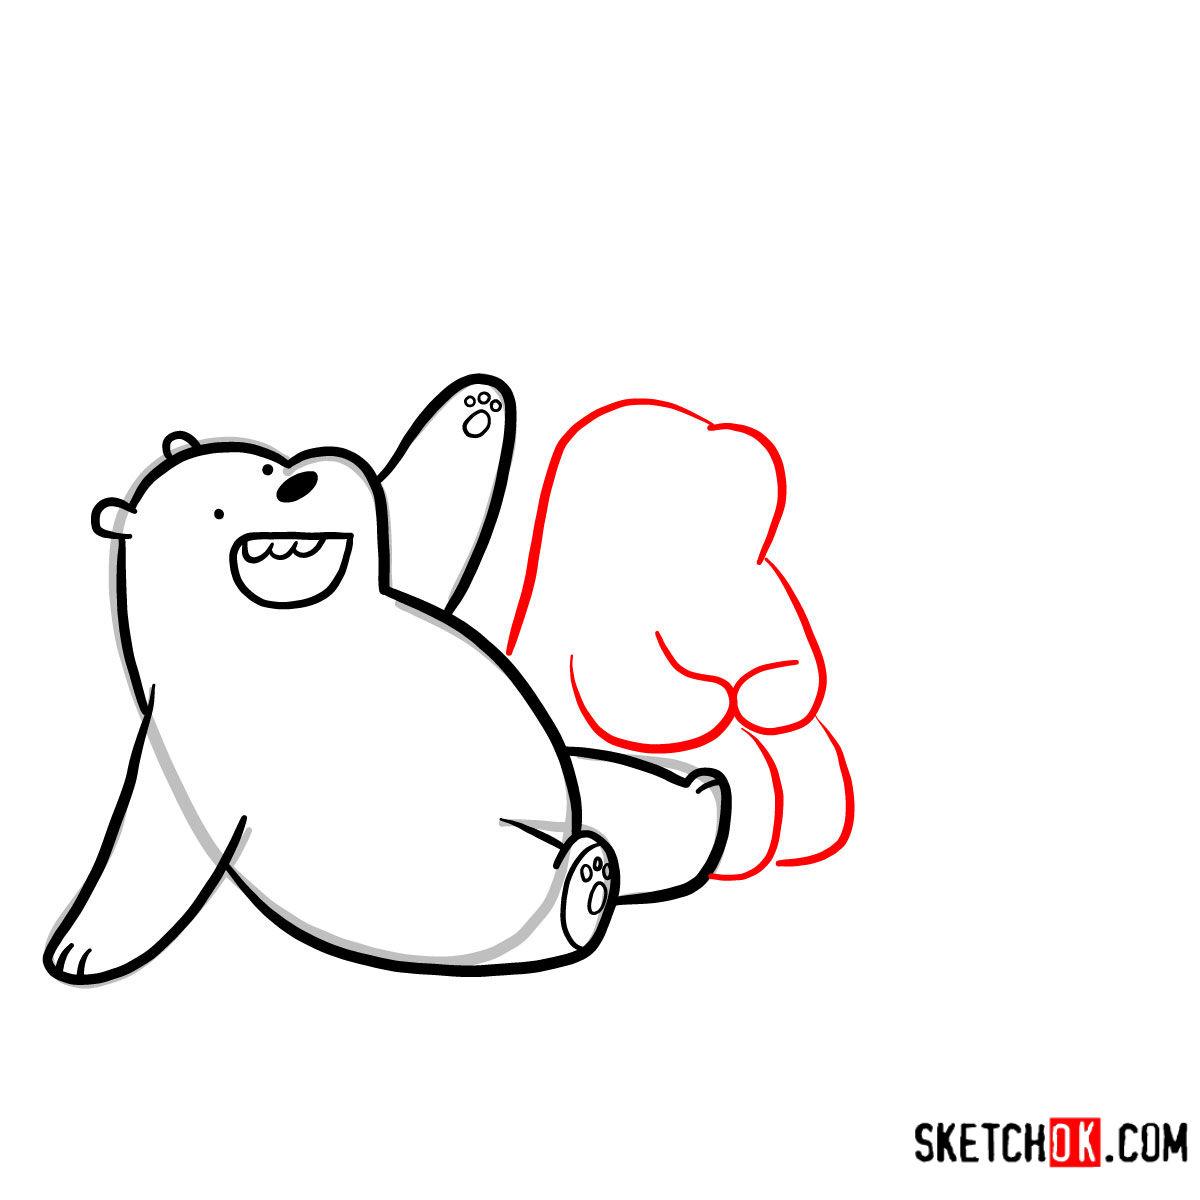 How to draw all three bears together | We Bare Bears - Sketchok easy  drawing guides